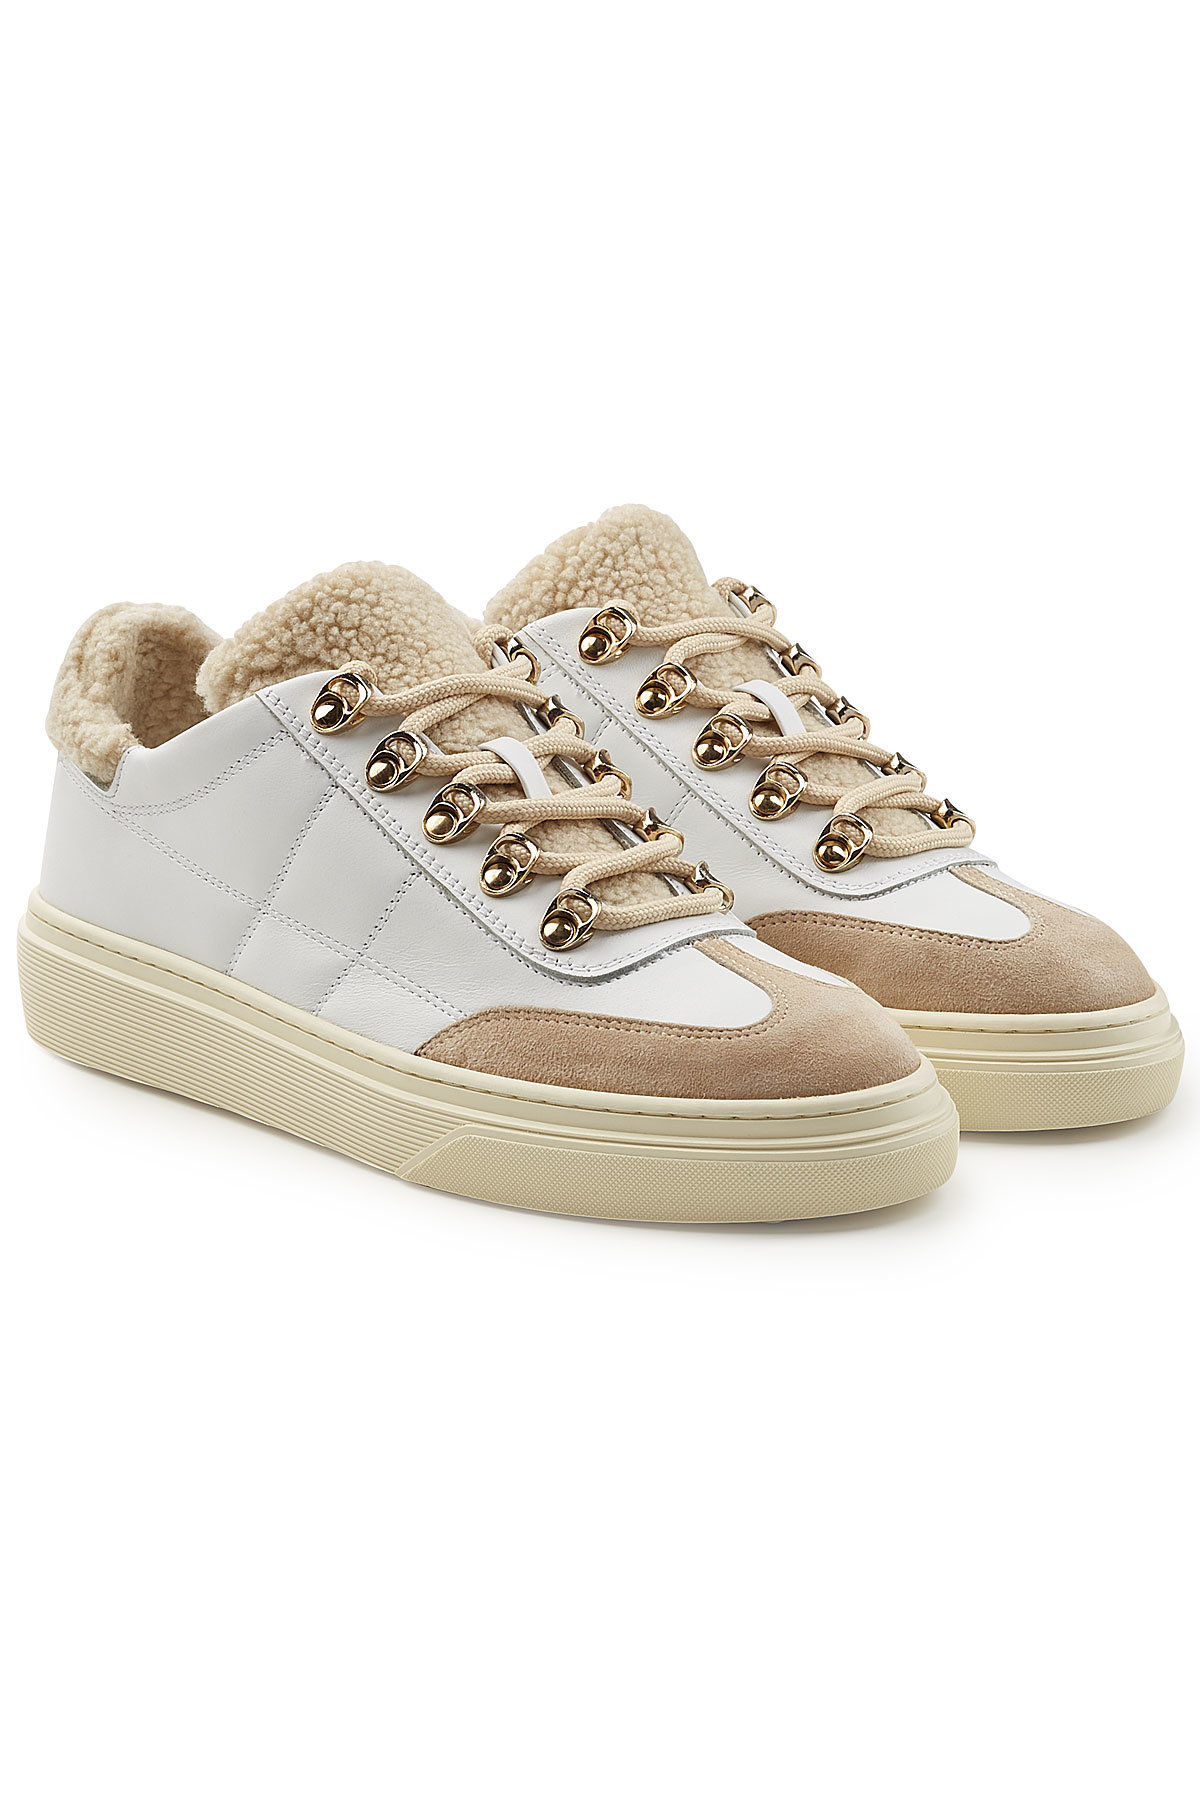 Hogan - Leather and Suede Sneakers with Faux Shearling Insole